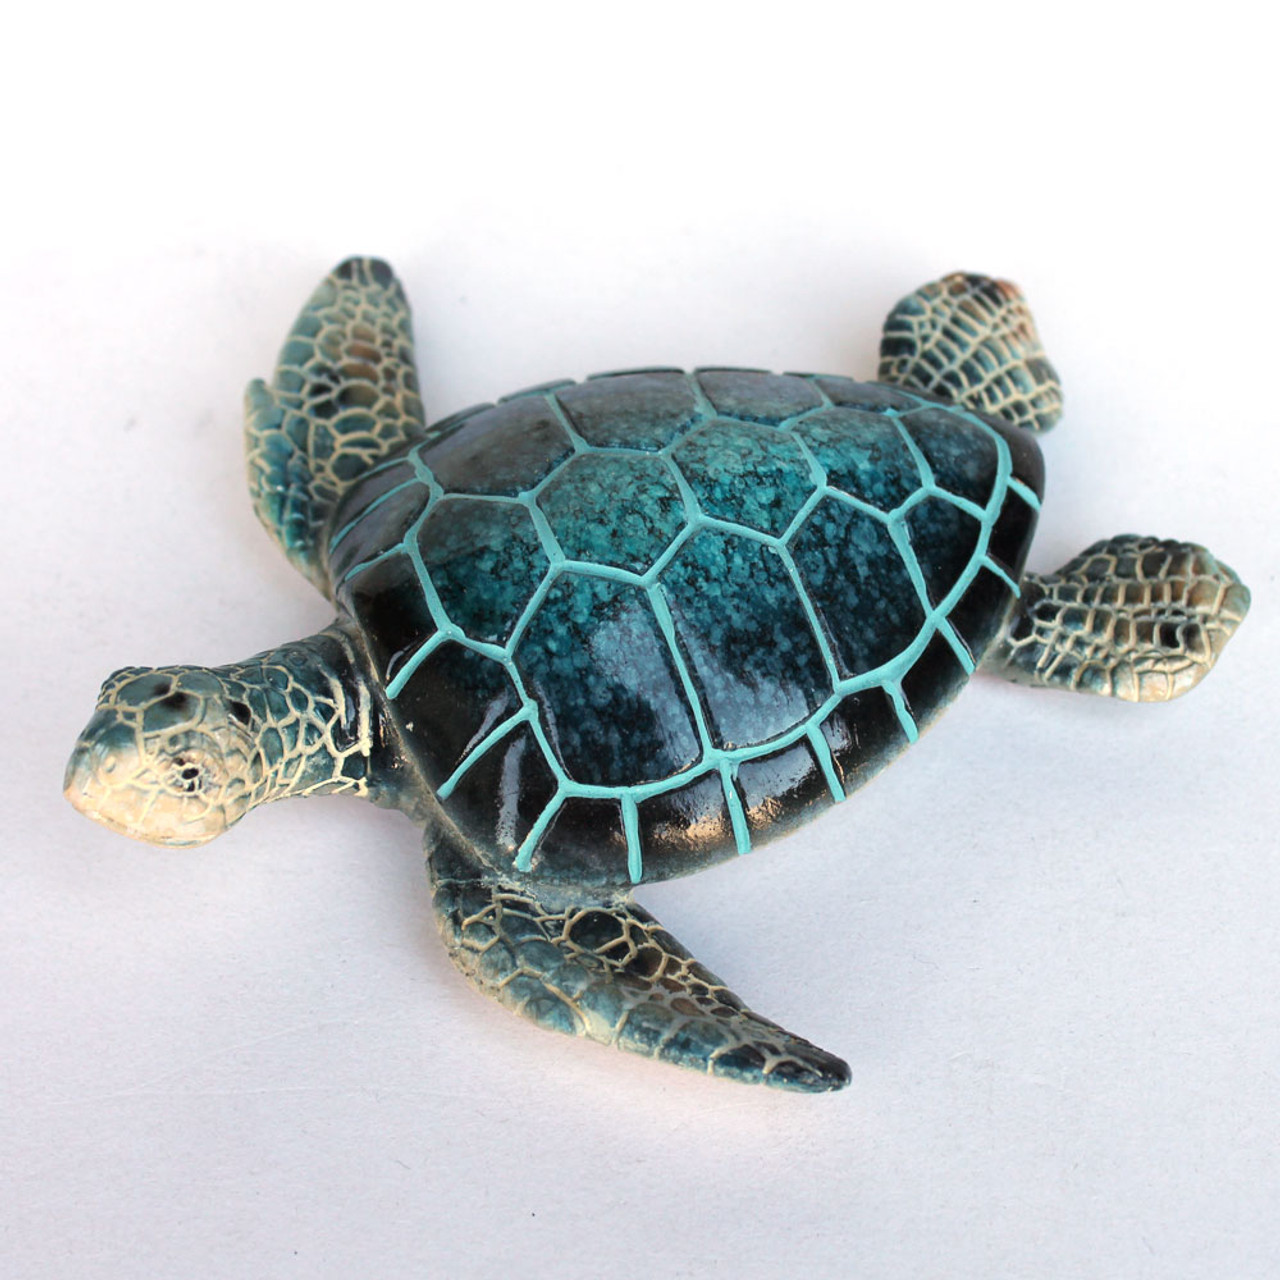 https://cdn11.bigcommerce.com/s-36f60/images/stencil/1280x1280/products/4162/6534/YXC_941_5_blue_turtle_figure__32619.1629317045.jpg?c=2?imbypass=on